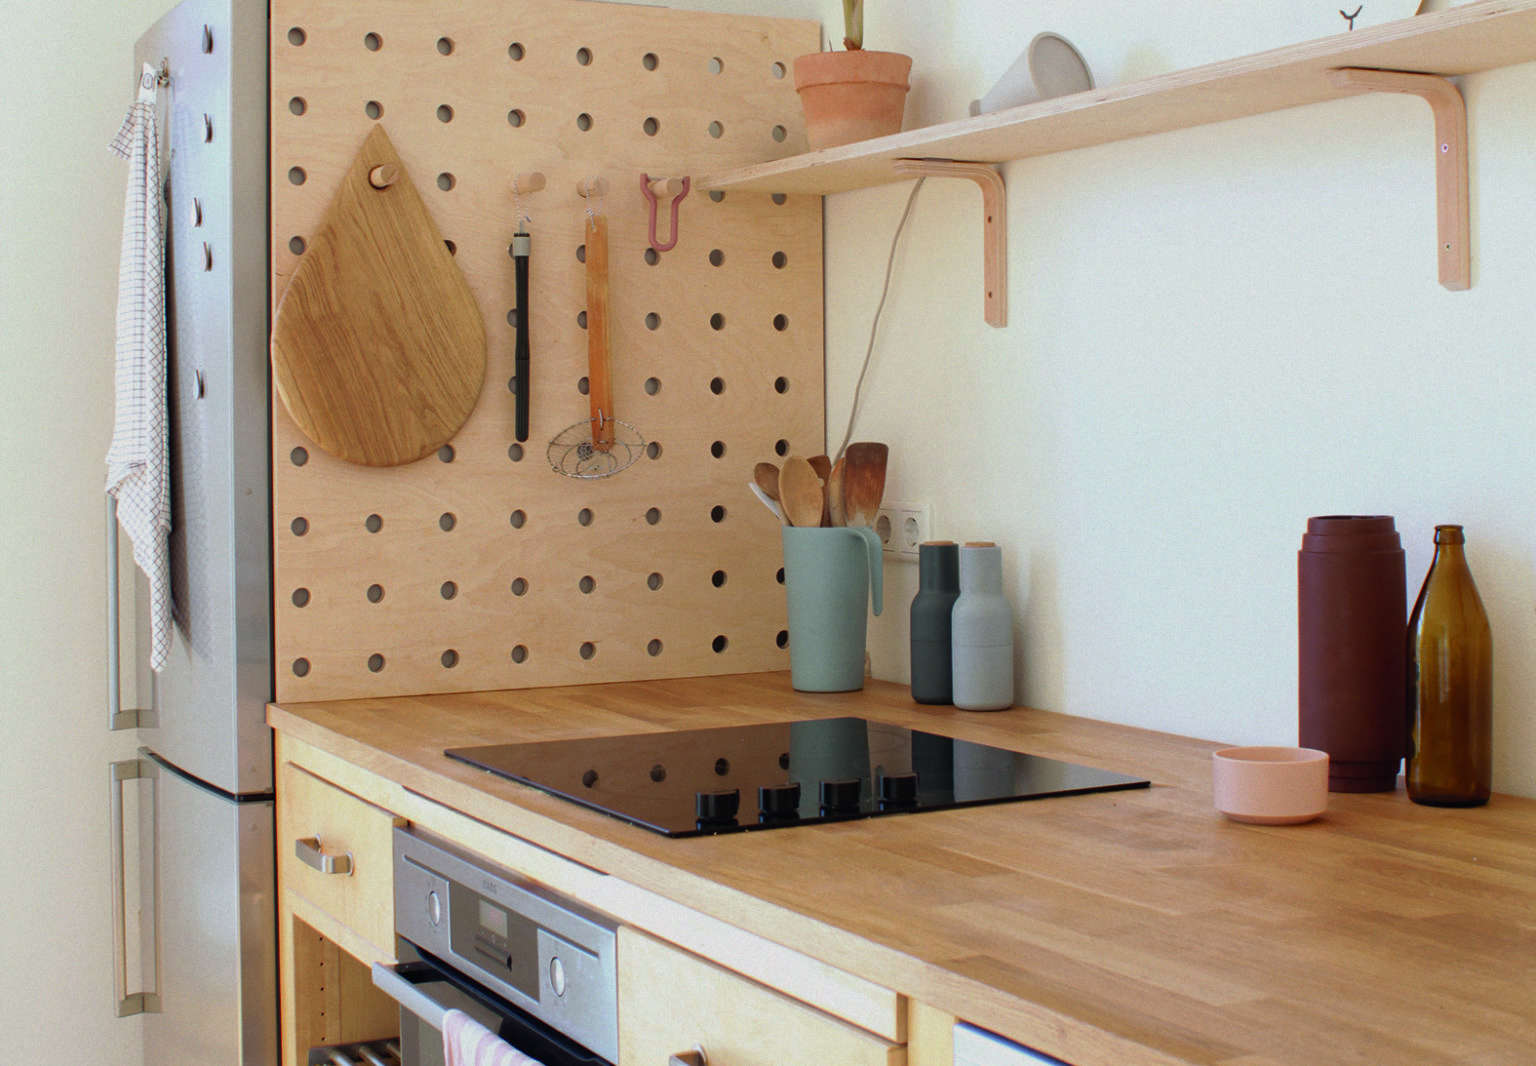 A DIY wooden pegboard in the kitchen of illustrator/graphic designer Swantje Hindrichsen created from used Ikea components.